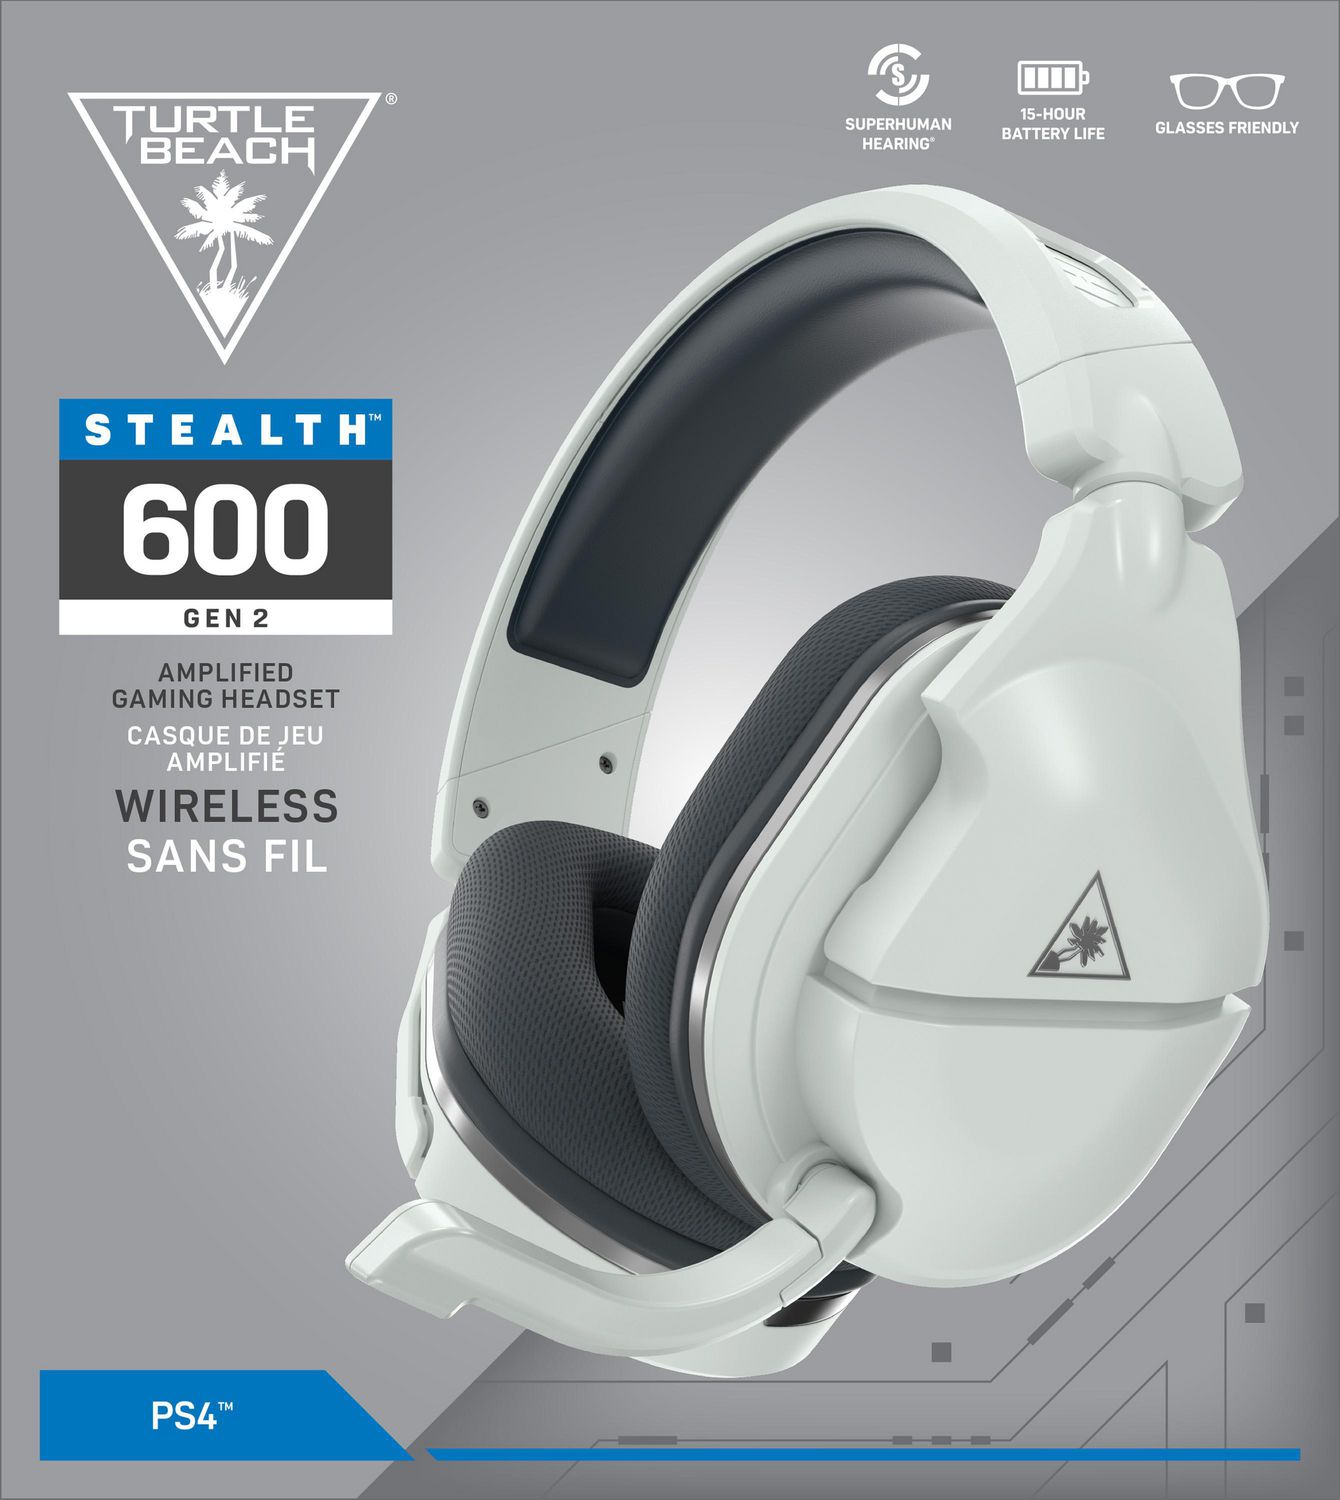 can you use turtle beach stealth 600 xbox on ps4